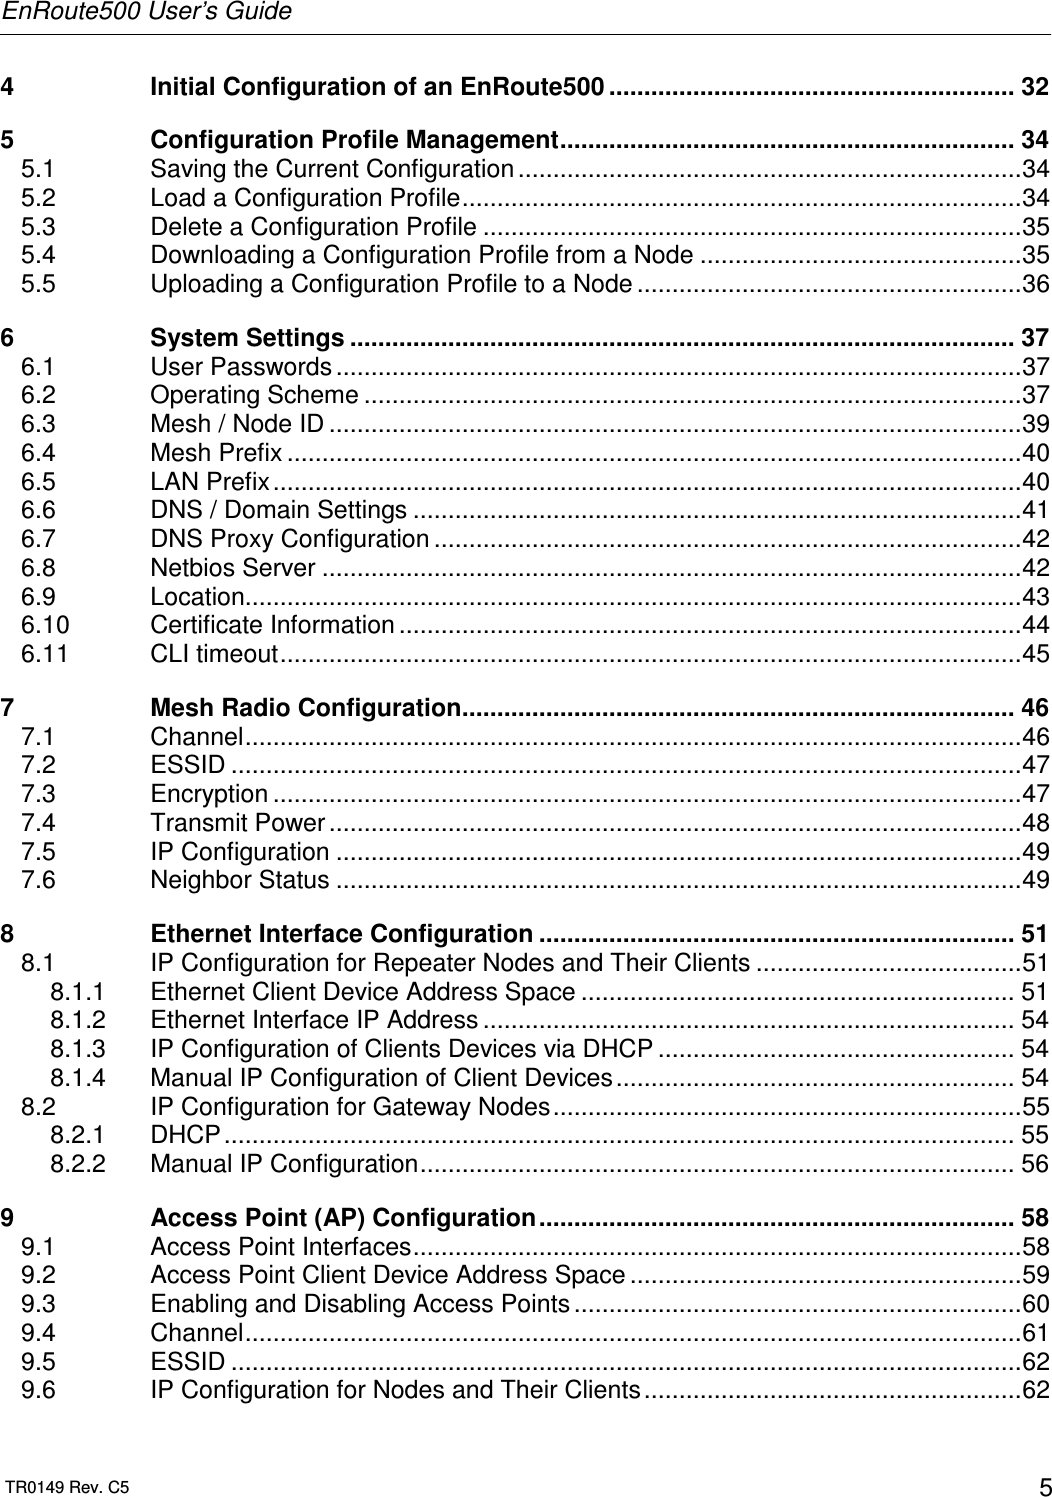 EnRoute500 User’s Guide  TR0149 Rev. C5  5 4 Initial Configuration of an EnRoute500 .......................................................... 32 5 Configuration Profile Management................................................................. 34 5.1 Saving the Current Configuration........................................................................34 5.2 Load a Configuration Profile................................................................................34 5.3 Delete a Configuration Profile .............................................................................35 5.4 Downloading a Configuration Profile from a Node ..............................................35 5.5 Uploading a Configuration Profile to a Node .......................................................36 6 System Settings ............................................................................................... 37 6.1 User Passwords ..................................................................................................37 6.2 Operating Scheme ..............................................................................................37 6.3 Mesh / Node ID ...................................................................................................39 6.4 Mesh Prefix .........................................................................................................40 6.5 LAN Prefix...........................................................................................................40 6.6 DNS / Domain Settings .......................................................................................41 6.7 DNS Proxy Configuration ....................................................................................42 6.8 Netbios Server ....................................................................................................42 6.9 Location...............................................................................................................43 6.10 Certificate Information .........................................................................................44 6.11 CLI timeout..........................................................................................................45 7 Mesh Radio Configuration............................................................................... 46 7.1 Channel...............................................................................................................46 7.2 ESSID .................................................................................................................47 7.3 Encryption ...........................................................................................................47 7.4 Transmit Power ...................................................................................................48 7.5 IP Configuration ..................................................................................................49 7.6 Neighbor Status ..................................................................................................49 8 Ethernet Interface Configuration .................................................................... 51 8.1 IP Configuration for Repeater Nodes and Their Clients ......................................51 8.1.1 Ethernet Client Device Address Space .............................................................. 51 8.1.2 Ethernet Interface IP Address ............................................................................ 54 8.1.3 IP Configuration of Clients Devices via DHCP ................................................... 54 8.1.4 Manual IP Configuration of Client Devices......................................................... 54 8.2 IP Configuration for Gateway Nodes...................................................................55 8.2.1 DHCP................................................................................................................. 55 8.2.2 Manual IP Configuration..................................................................................... 56 9 Access Point (AP) Configuration.................................................................... 58 9.1 Access Point Interfaces.......................................................................................58 9.2 Access Point Client Device Address Space ........................................................59 9.3 Enabling and Disabling Access Points ................................................................60 9.4 Channel...............................................................................................................61 9.5 ESSID .................................................................................................................62 9.6 IP Configuration for Nodes and Their Clients ......................................................62 